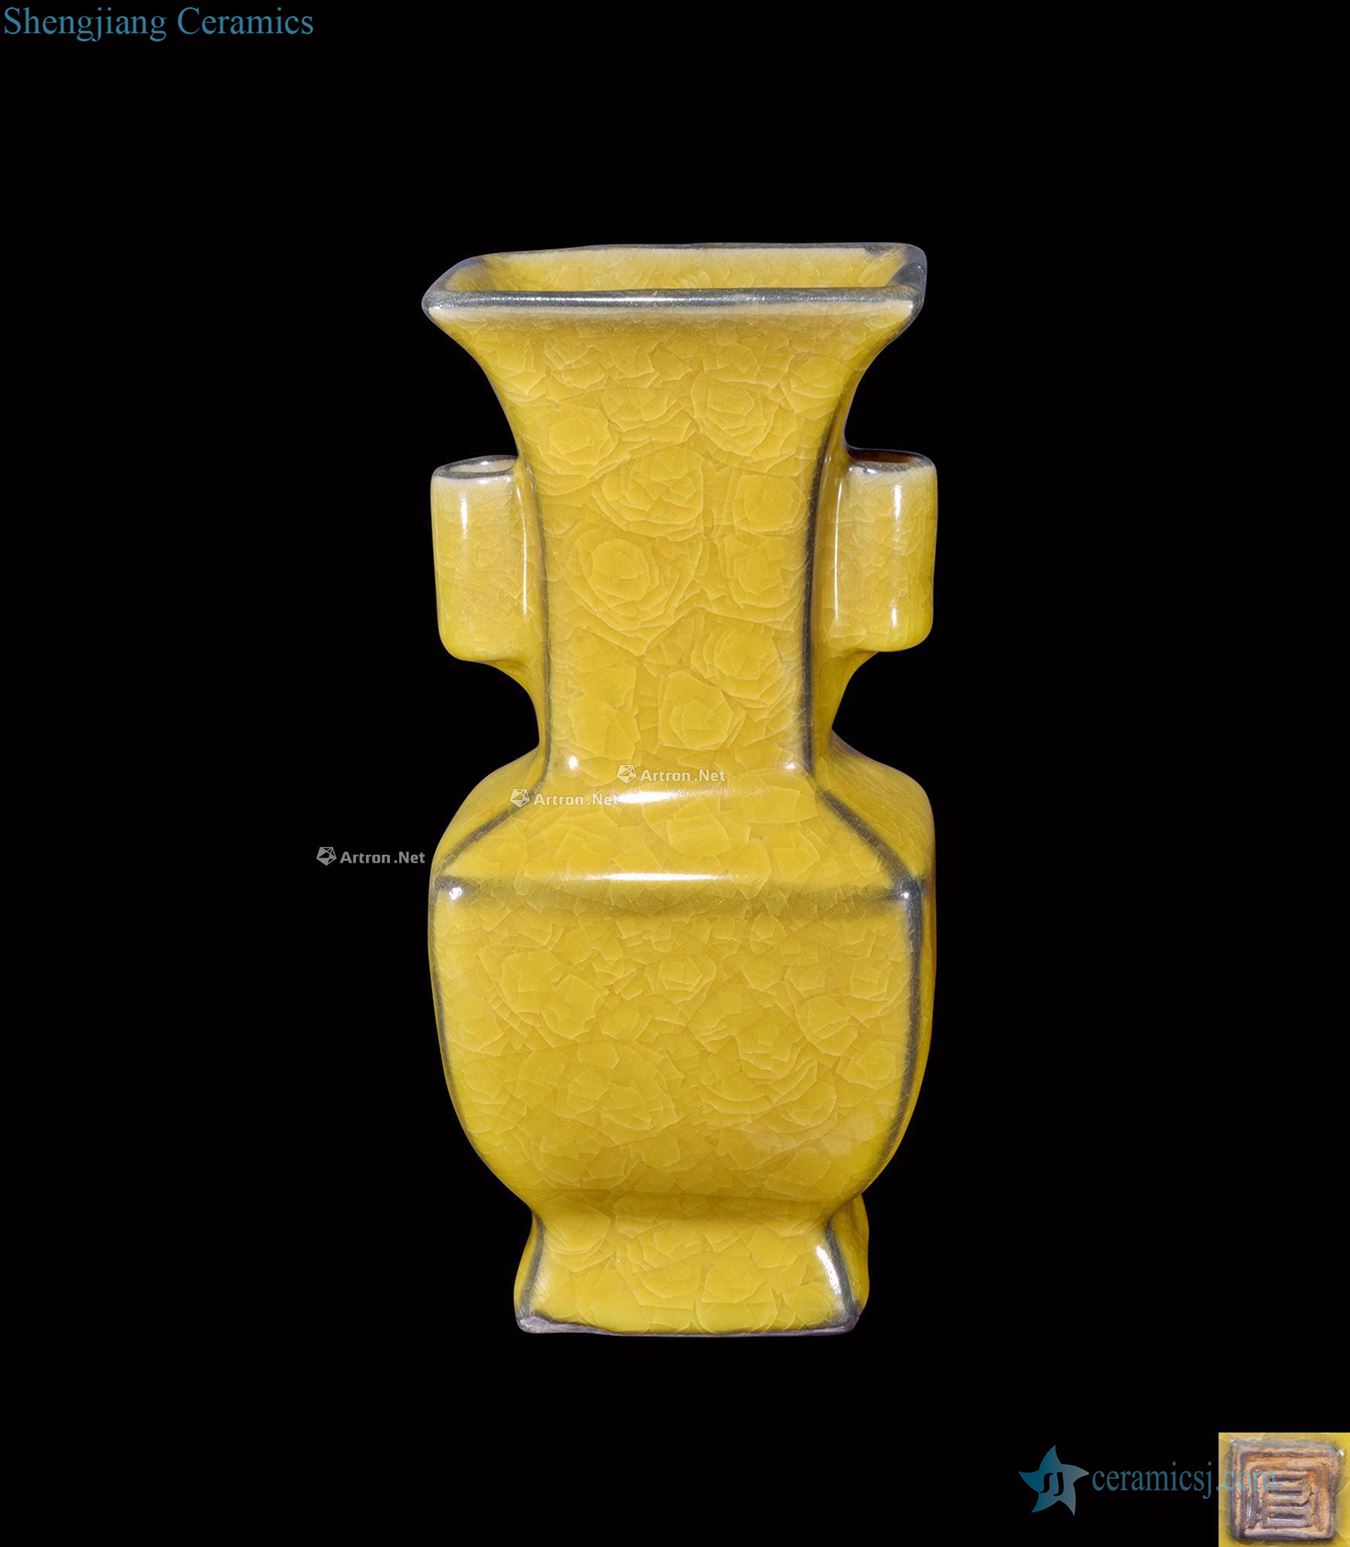 The song dynasty Kiln yellow glaze sifang penetration ears